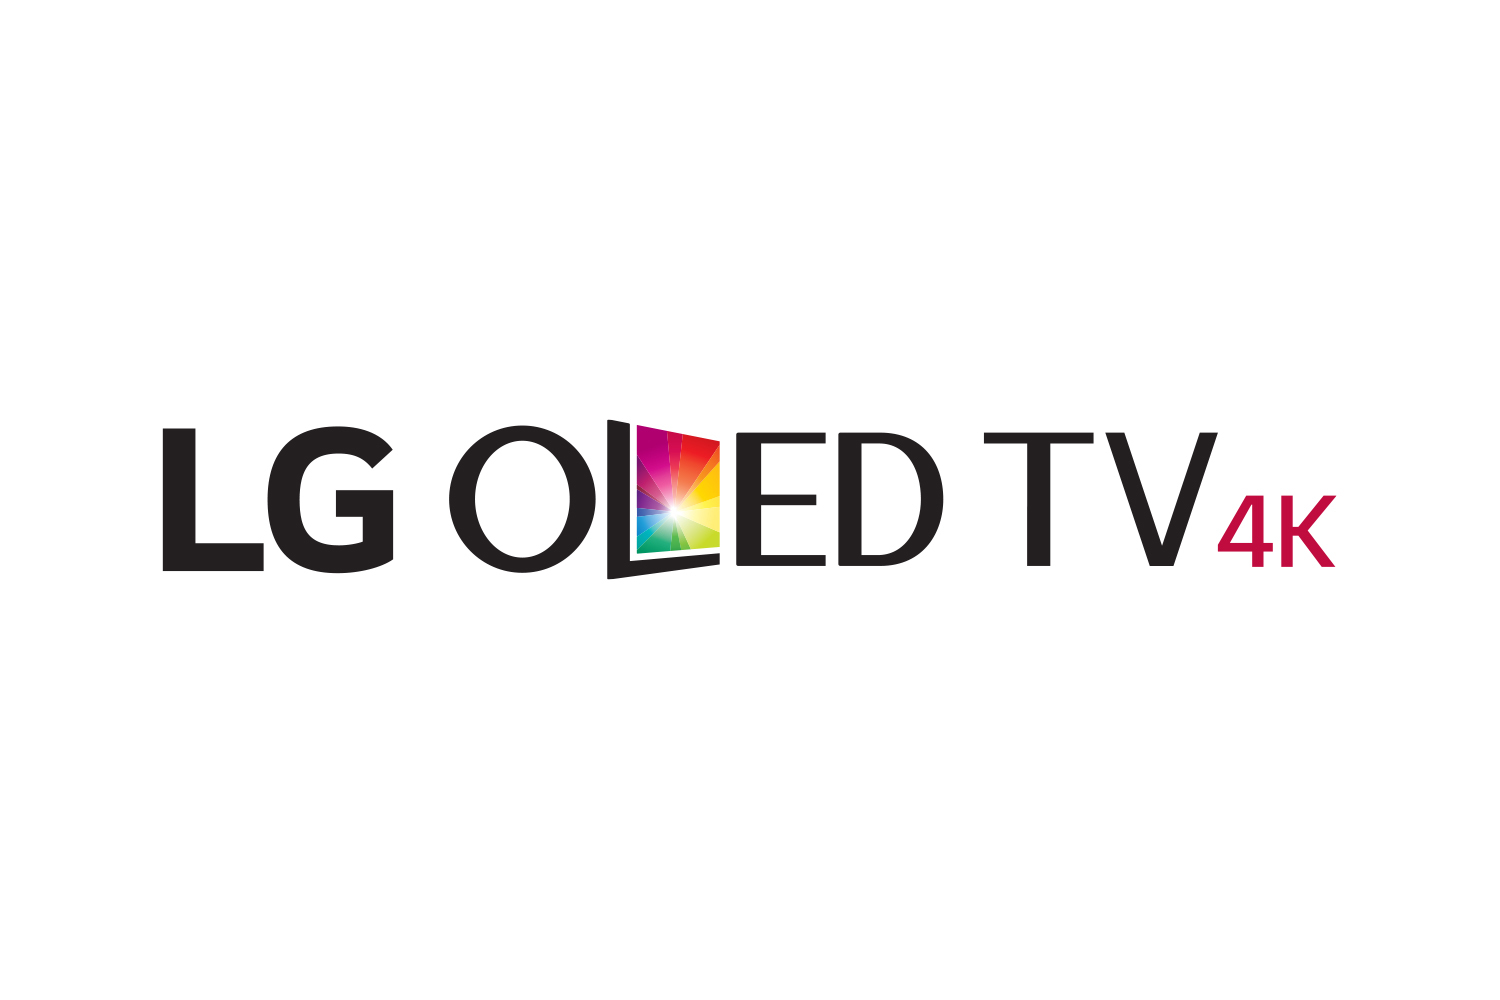 Holdall calcium commitment Dolby Laboratories and LG Electronics Announce LG Premium TV Lineup Enabled  With Dolby Vision Technology | Business Wire